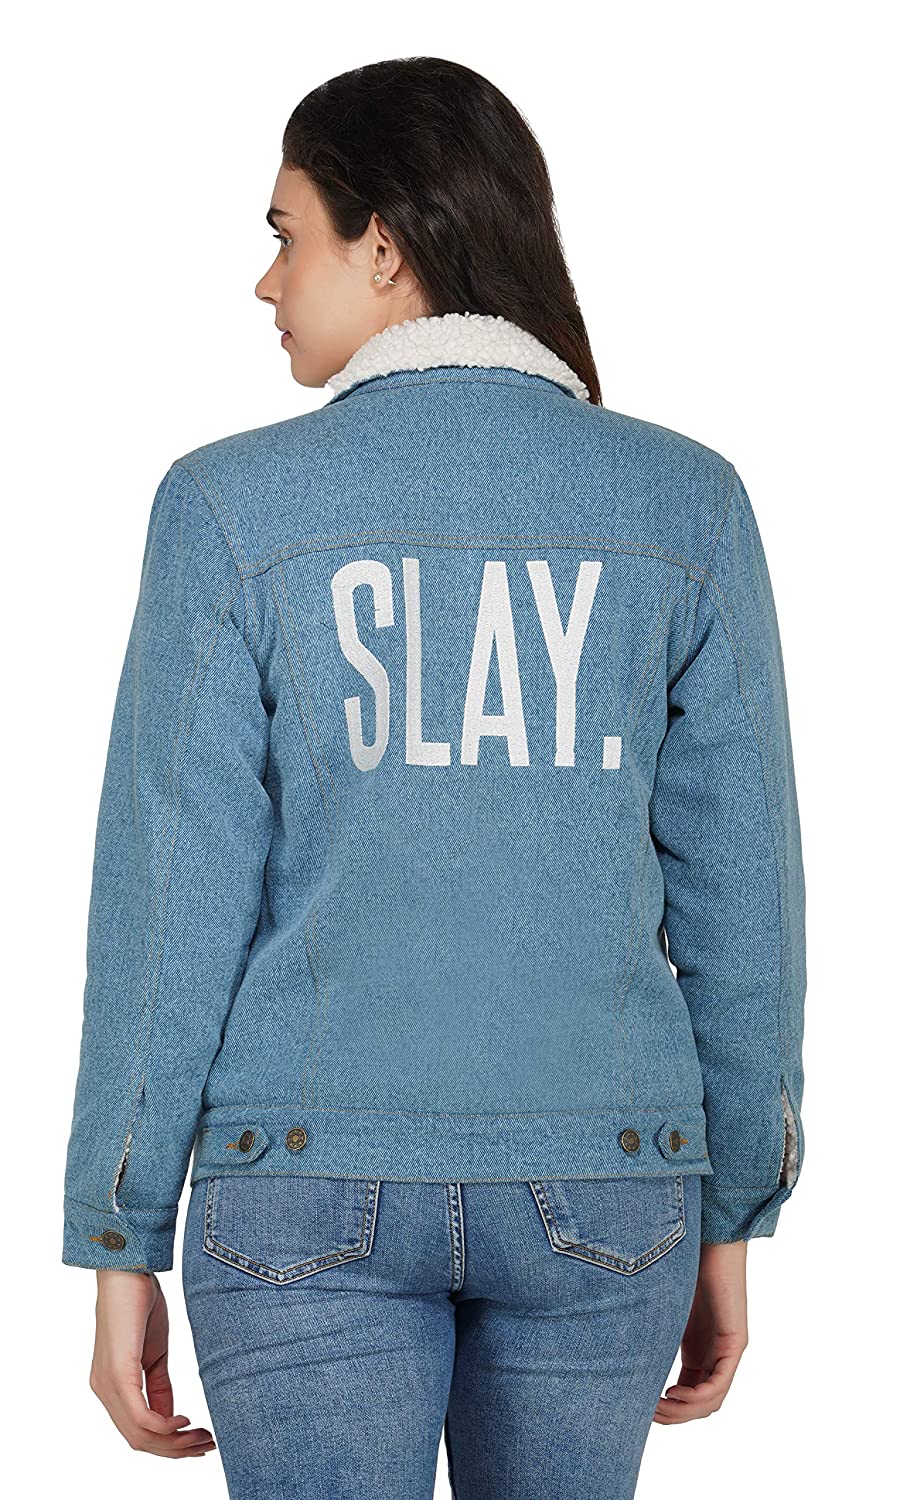 SLAY. Embroidered Women's Enzyme Washed Denim Jacket with Faux-fur Lining